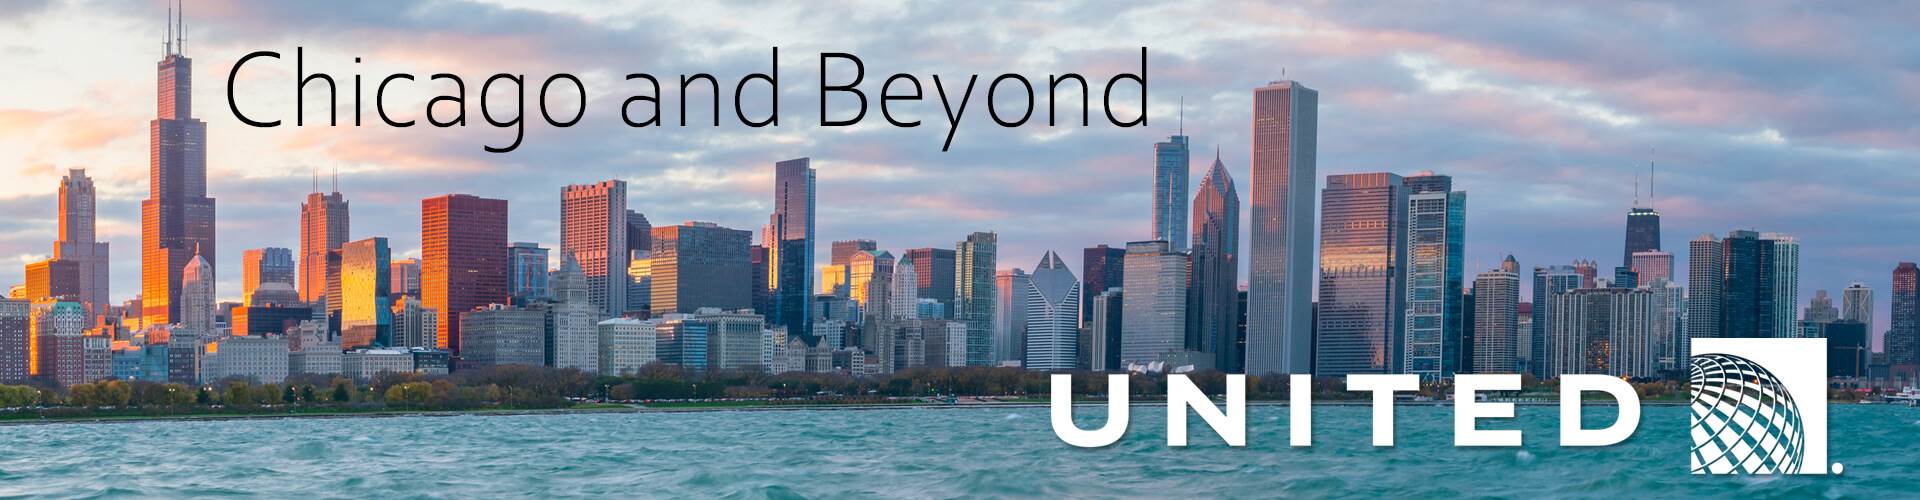 United: Chicago and beyond.